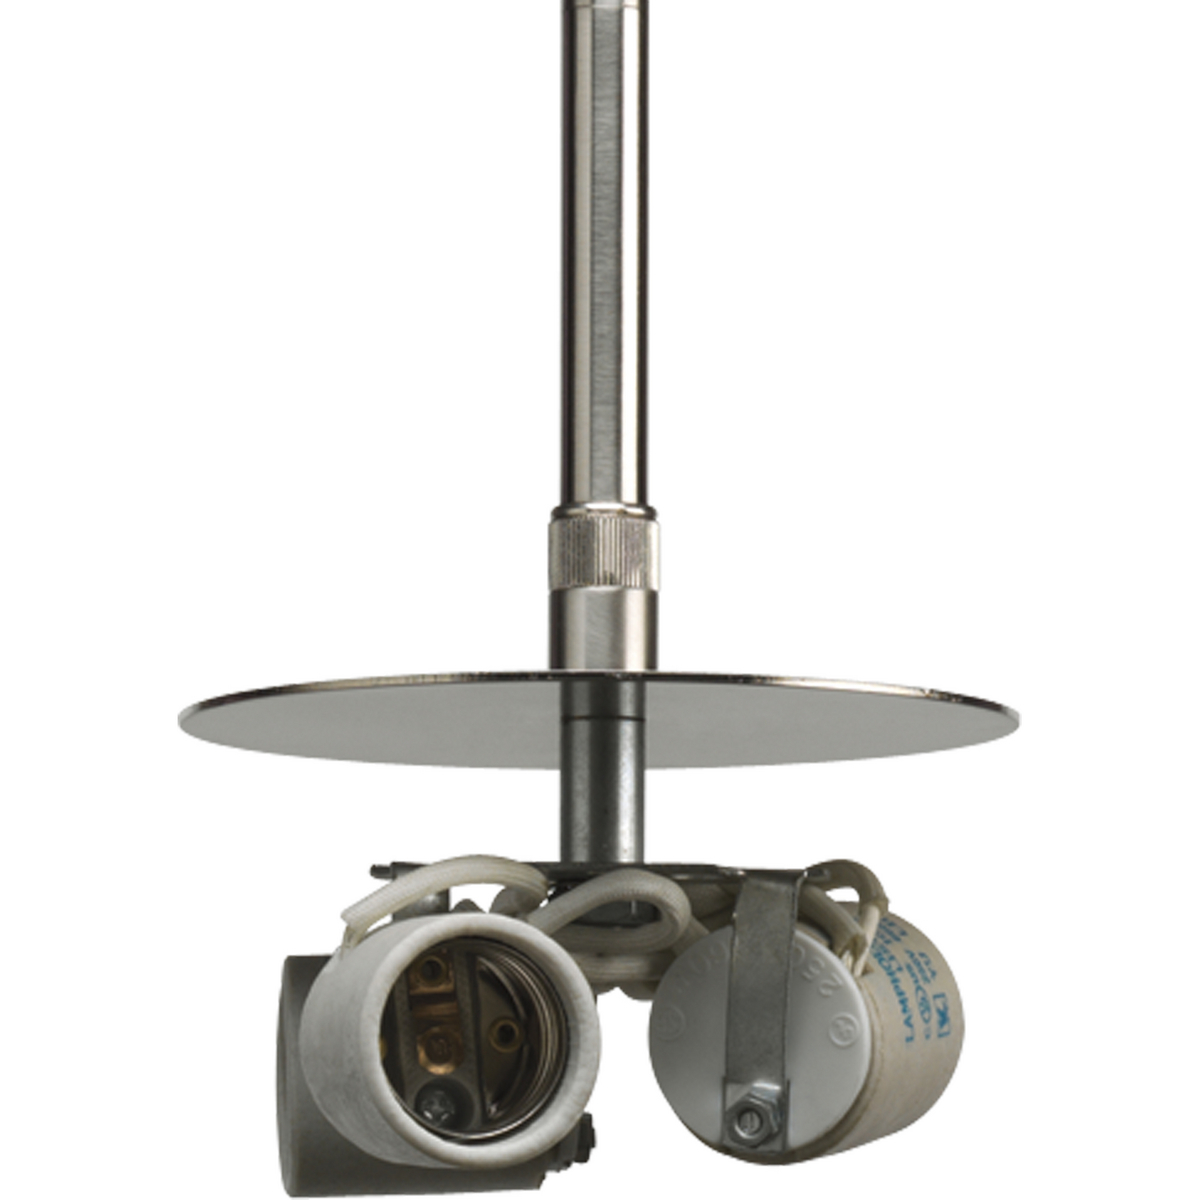 The Markor Series is a modular pendant system. The versatile series allow the choice of shades and stem kits. This three-light stem mounted pendant for use with Markor Shades. Shades sold separately. This stem may be used with all Markor shades 16 in-22 in sizes. (Cannot be used with 9 in & 10 in shades) Includes two 6 in, one 12 in and two 15 in stems with 90 degree swivel. Brushed Nickel finish.